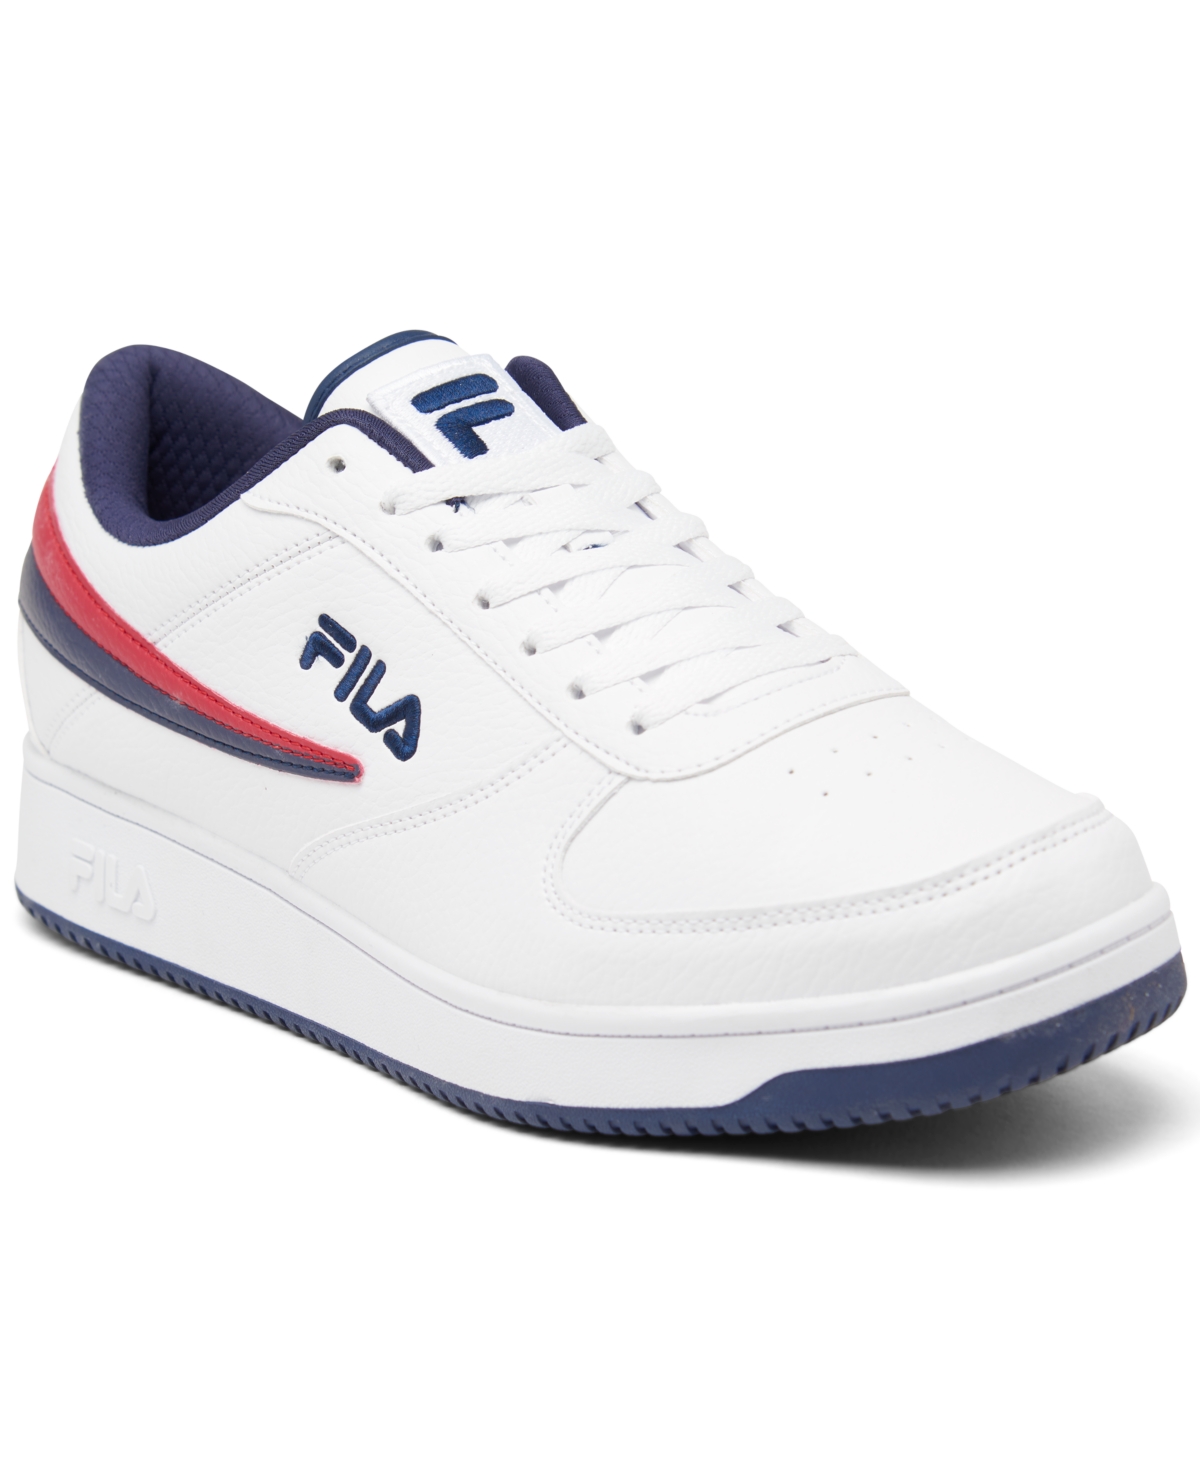 Men's A Low Casual Sneakers from Finish Line - White, Navy